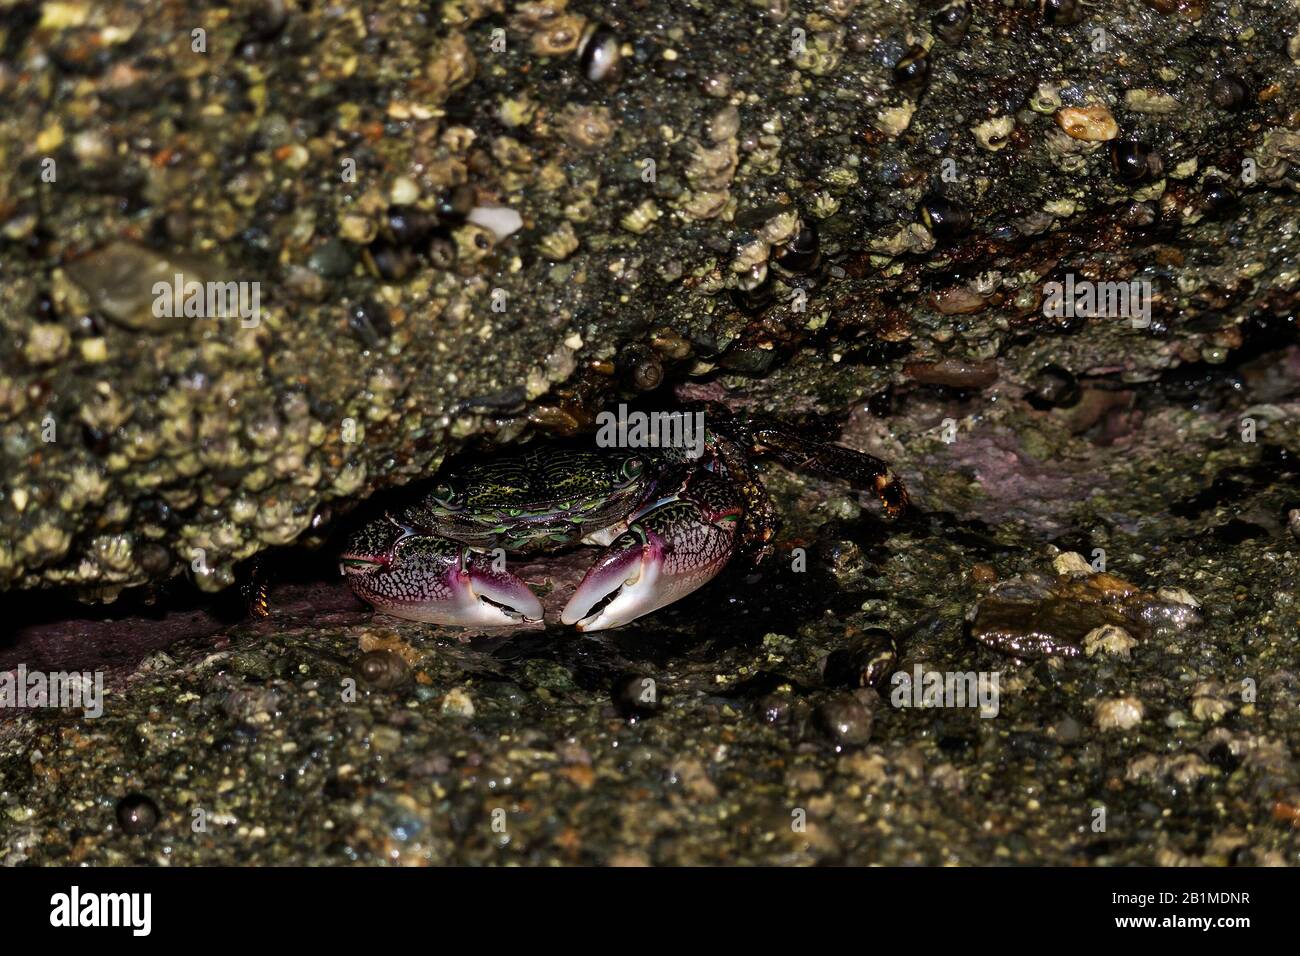 Striped (lined) shore crab (Pachygrapsus crassipes) shelters near rocks just outside a tidepool in southern California.  Crab is not underwater. Stock Photo